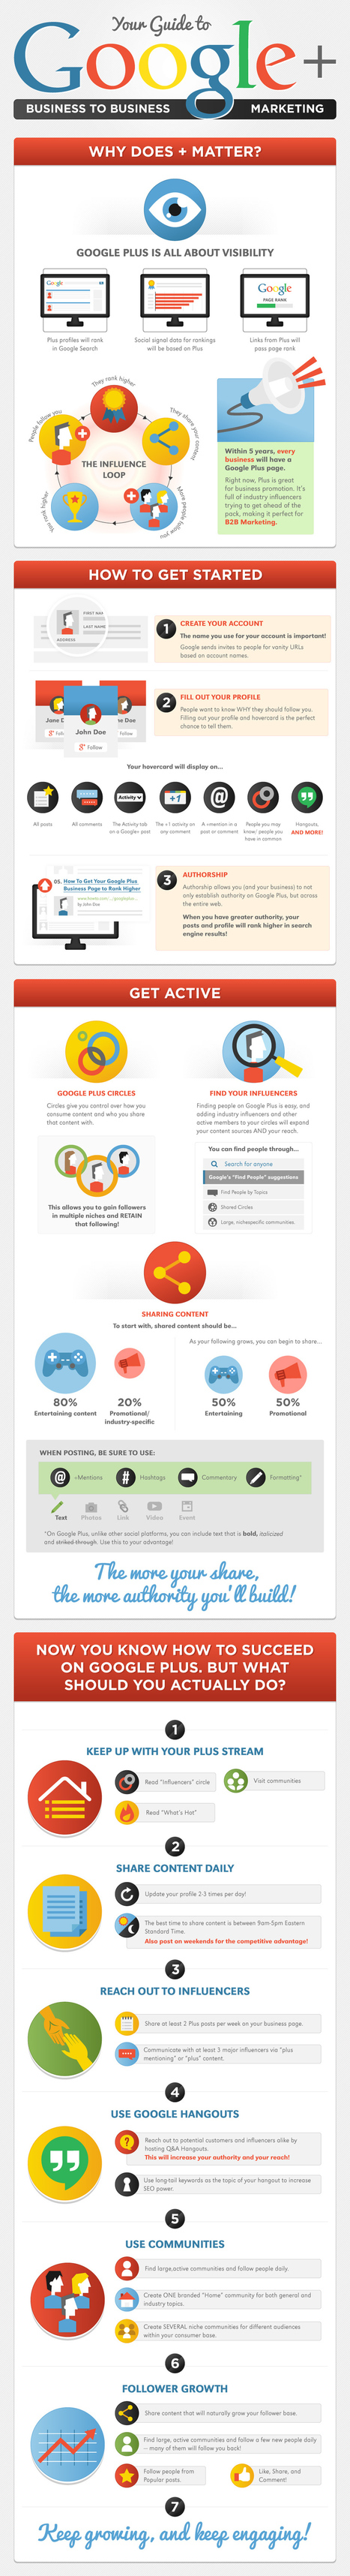 The Complete Guide to Google+ for B2B Marketing [Infographic] | Public Relations & Social Marketing Insight | Scoop.it